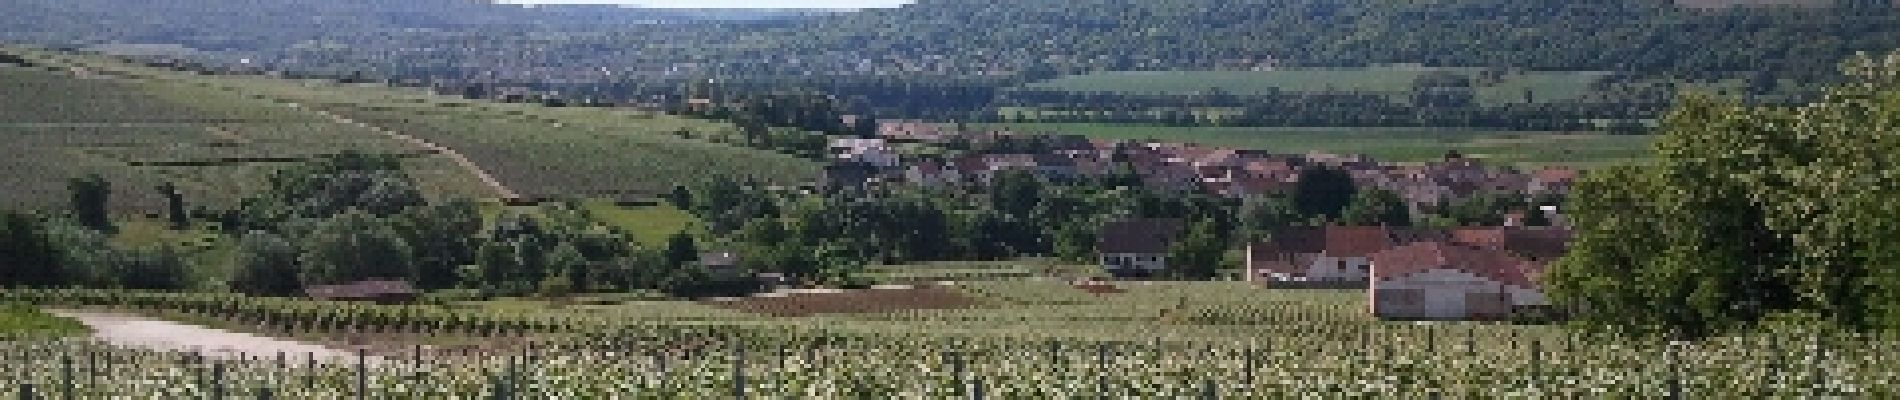 Tour Wandern Charly-sur-Marne - charly sur Marne - Photo